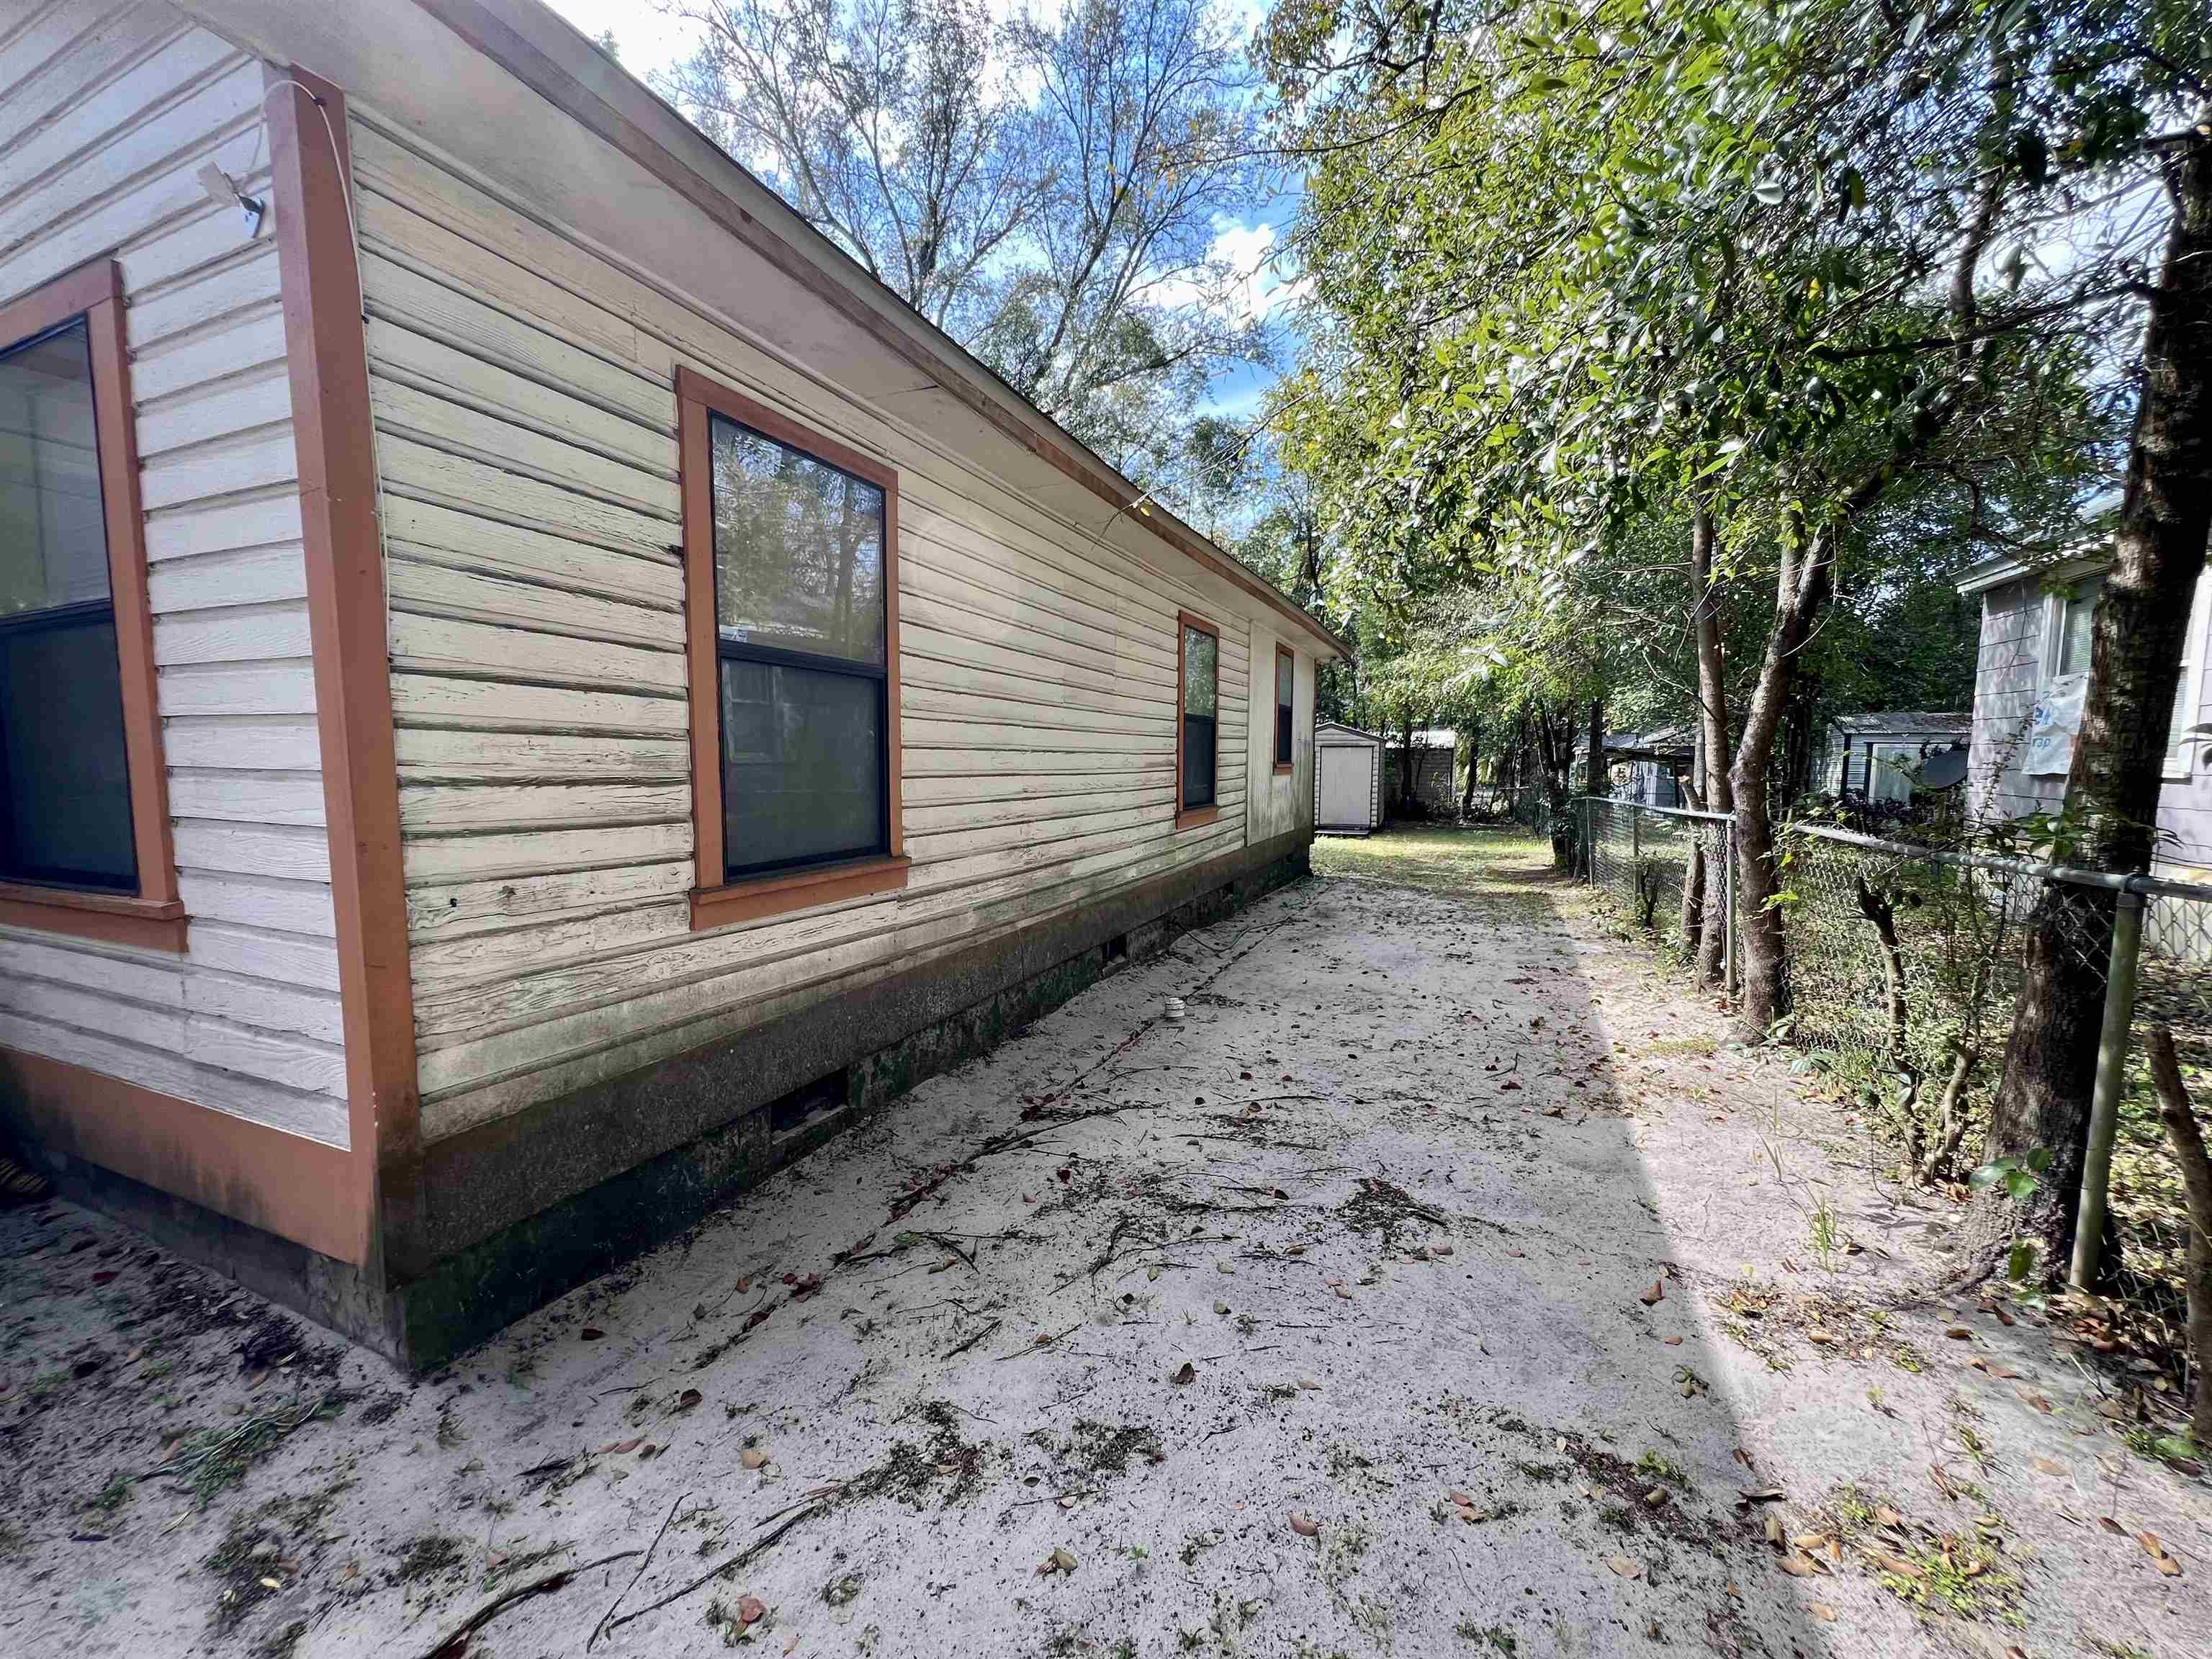 2728 Lake Mary Street,TALLAHASSEE,Florida 32310,3 Bedrooms Bedrooms,1 BathroomBathrooms,Detached single family,2728 Lake Mary Street,368920